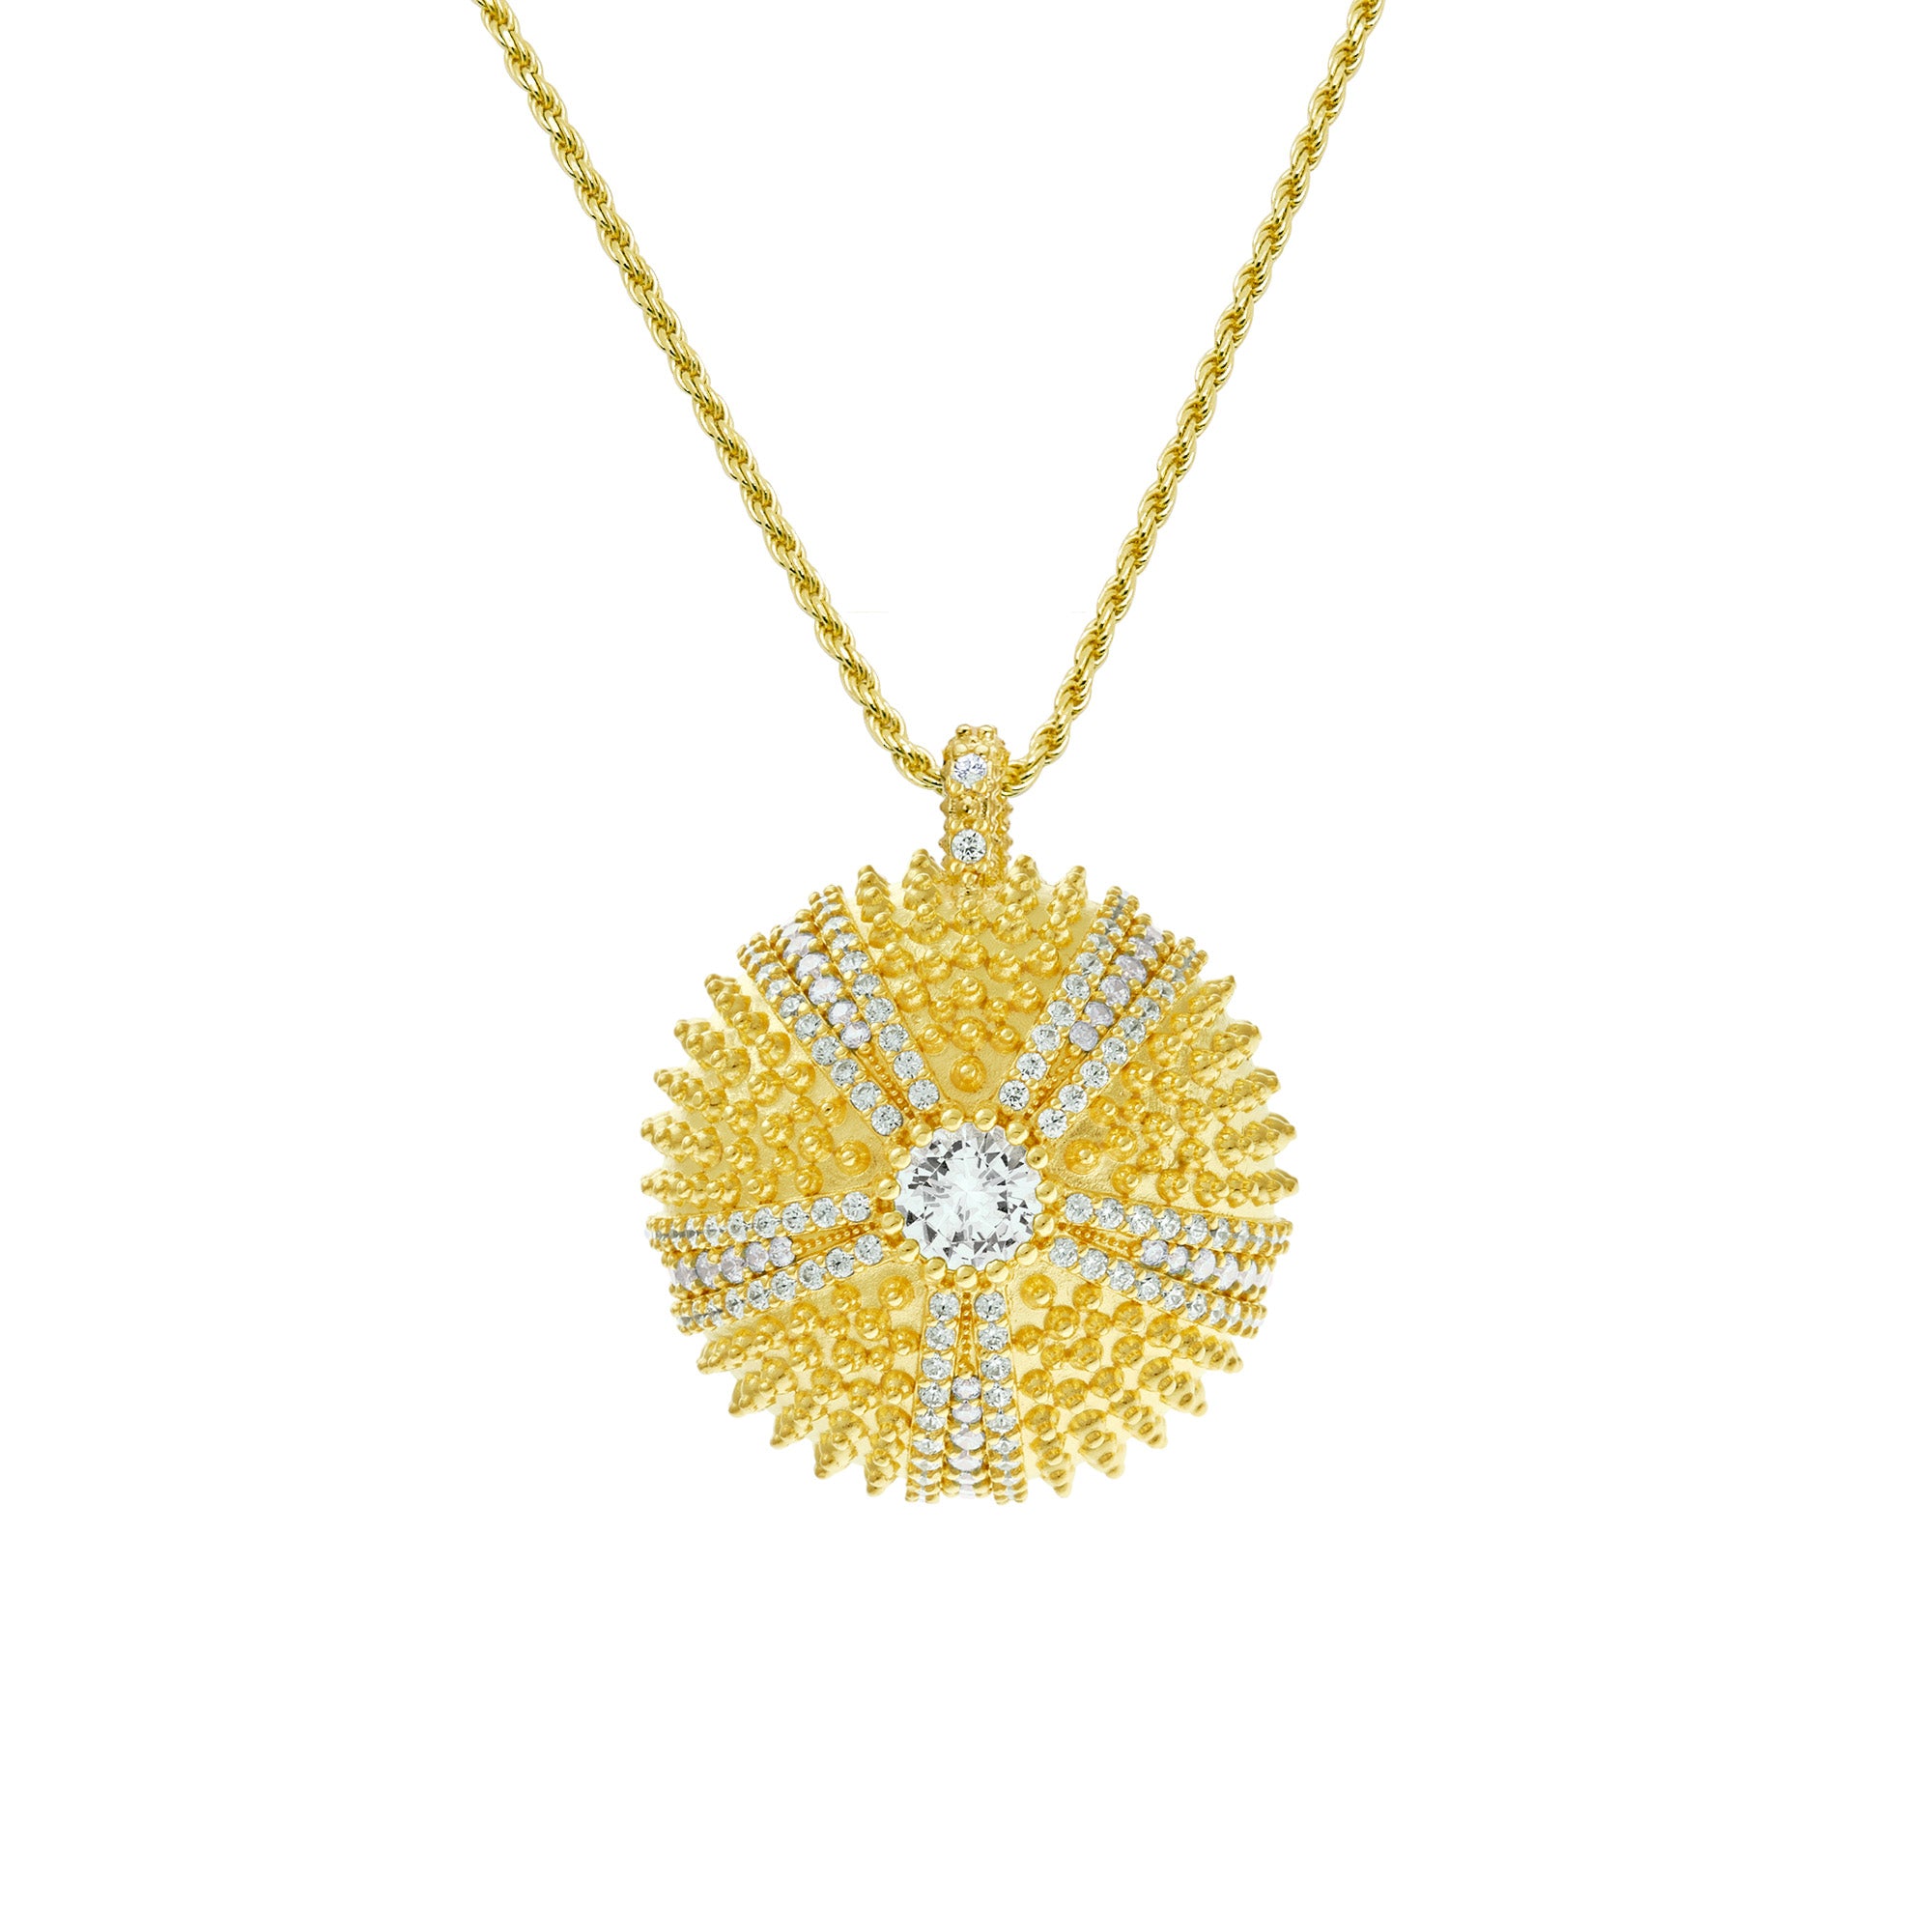 Sea Urchin Cocktail Necklace